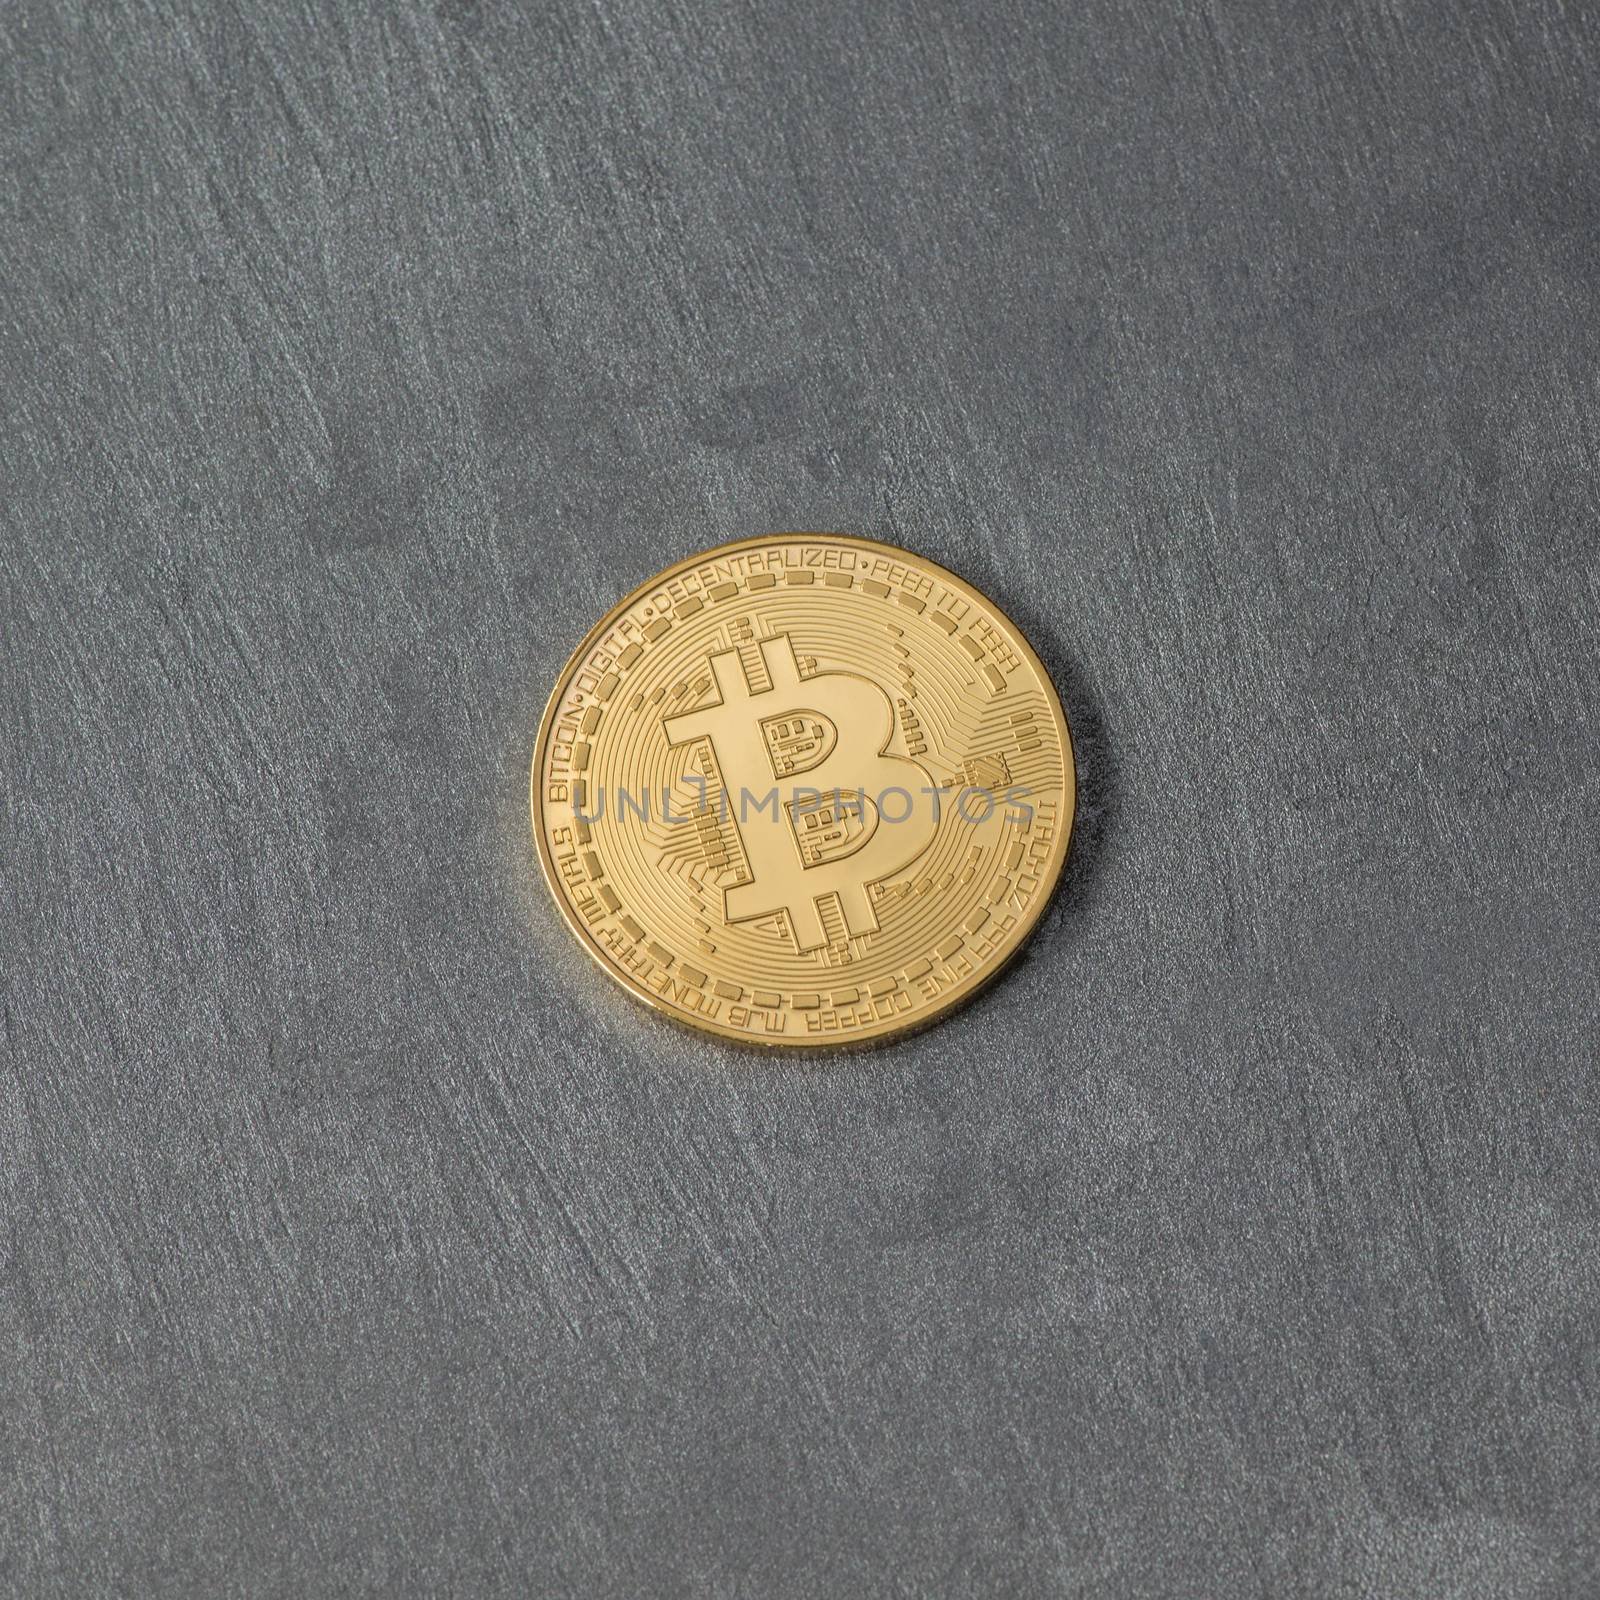 coins are bitcoin and litecoin by A_Karim